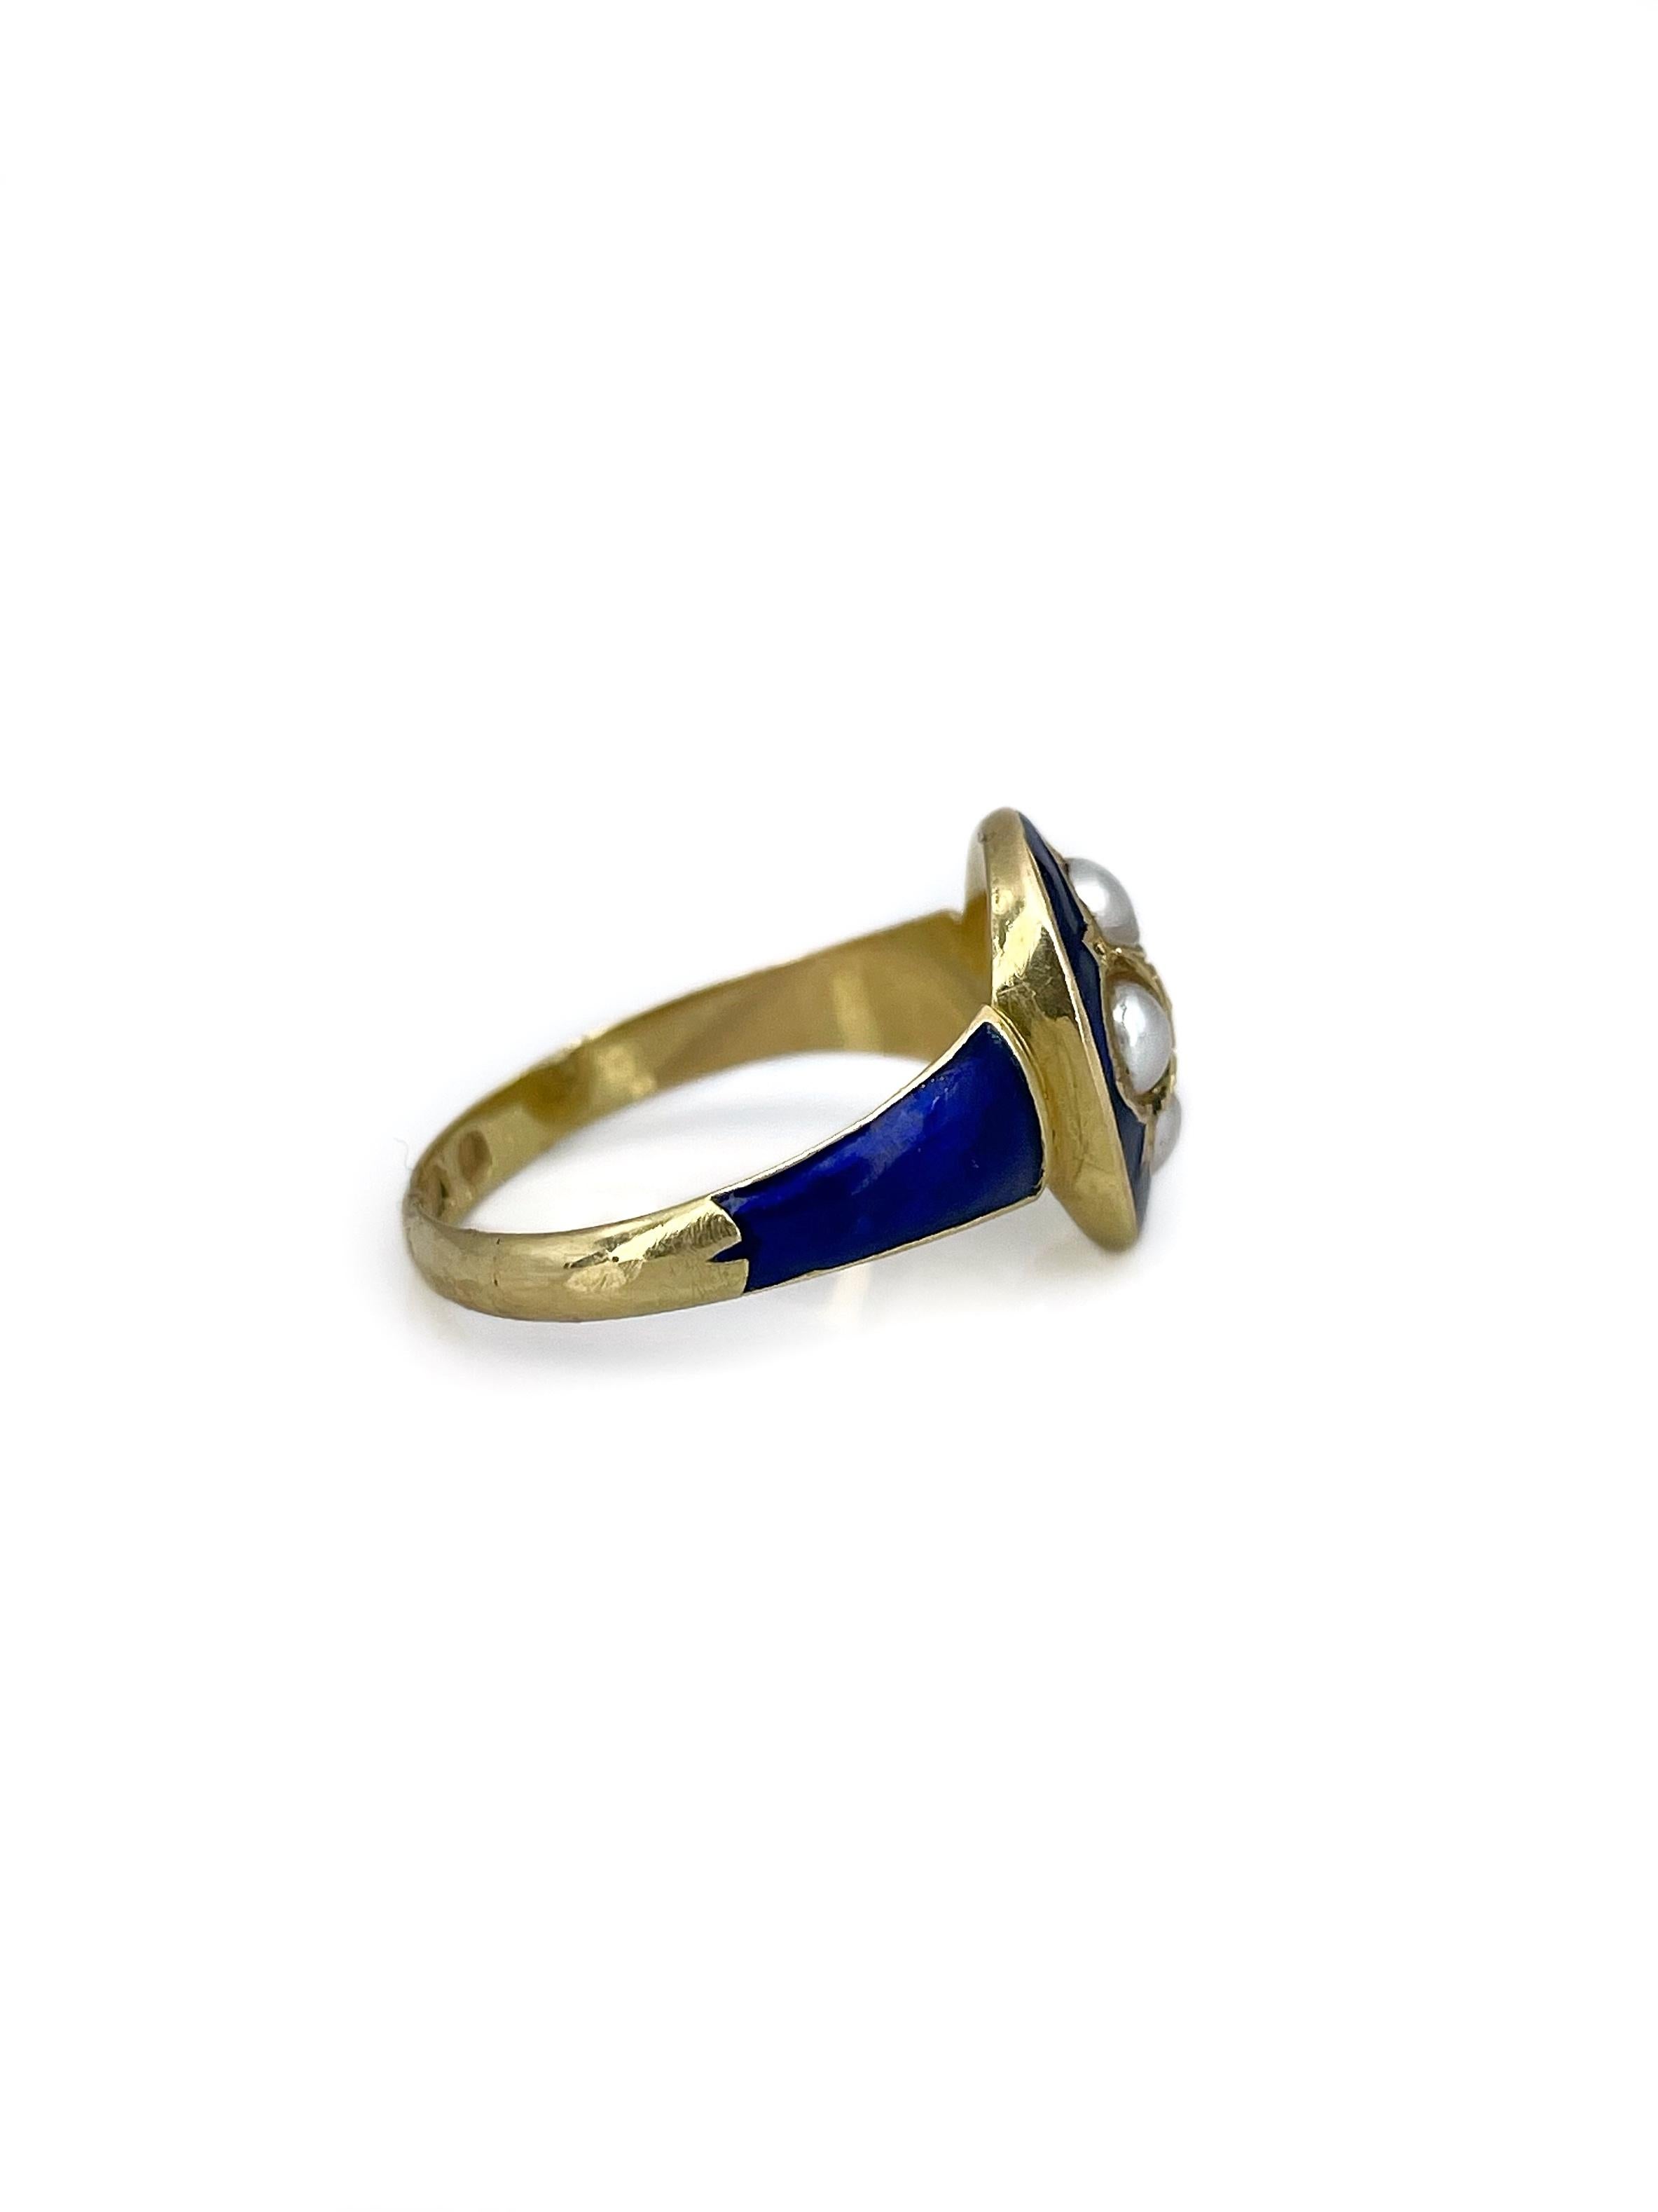 IMPORTANT: can’t be resized

This is a stunning Victorian navette ring crafted in 18K yellow gold. The piece features 4 cultured pearls and 1 rose cut diamond. It is adorned with blue enamel which is in perfect condition. Circa 1870. 

Weight: 2.76g